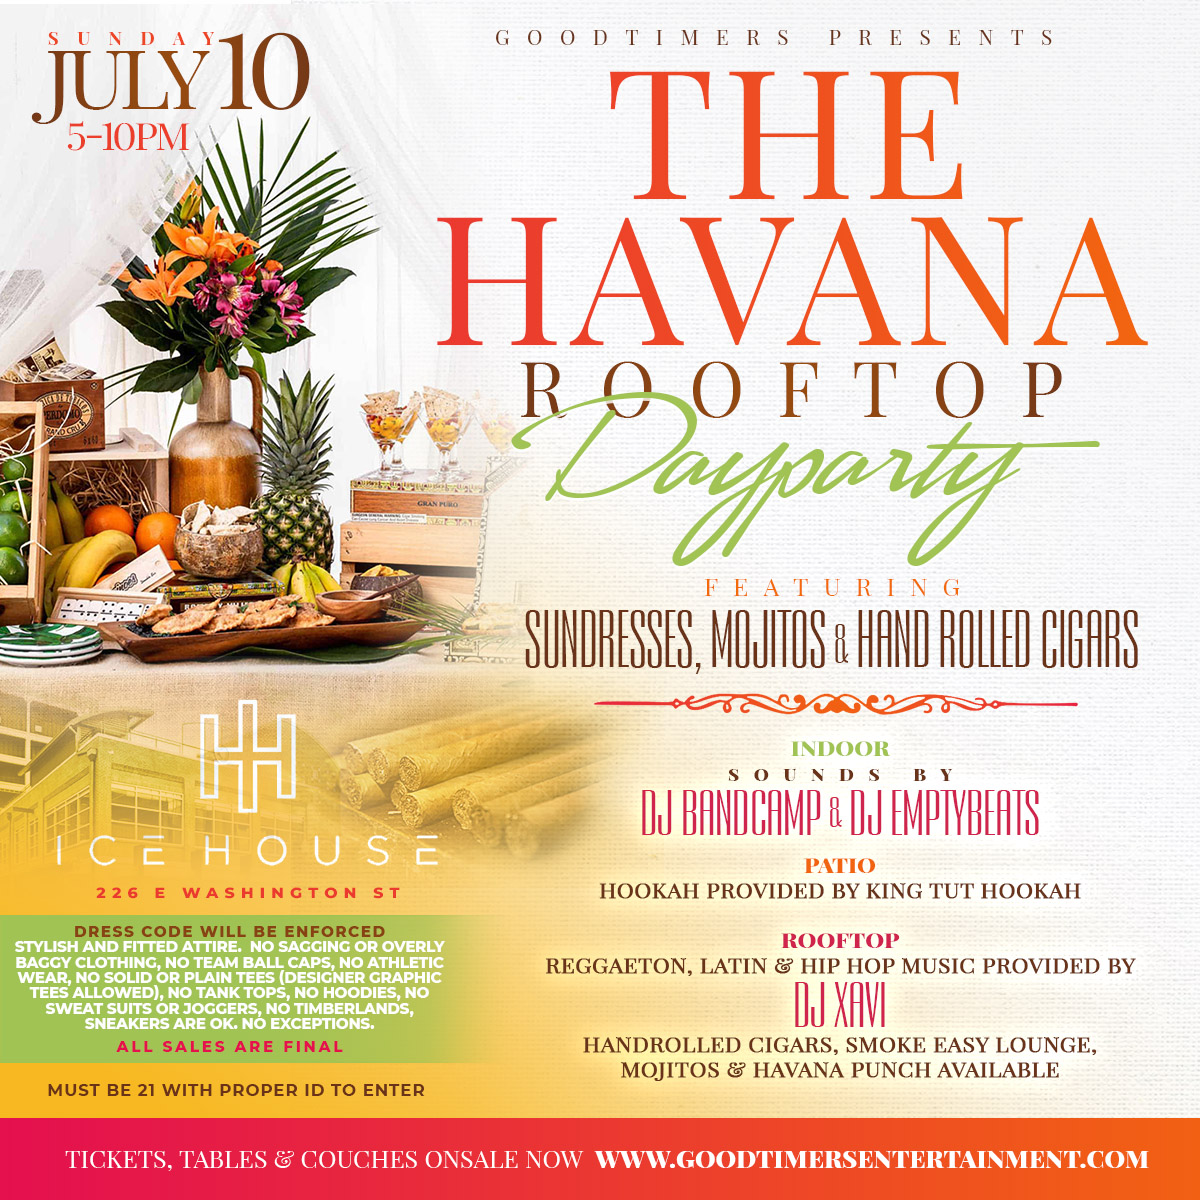 You are currently viewing The Havana Rooftop Dayparty @ Icehouse